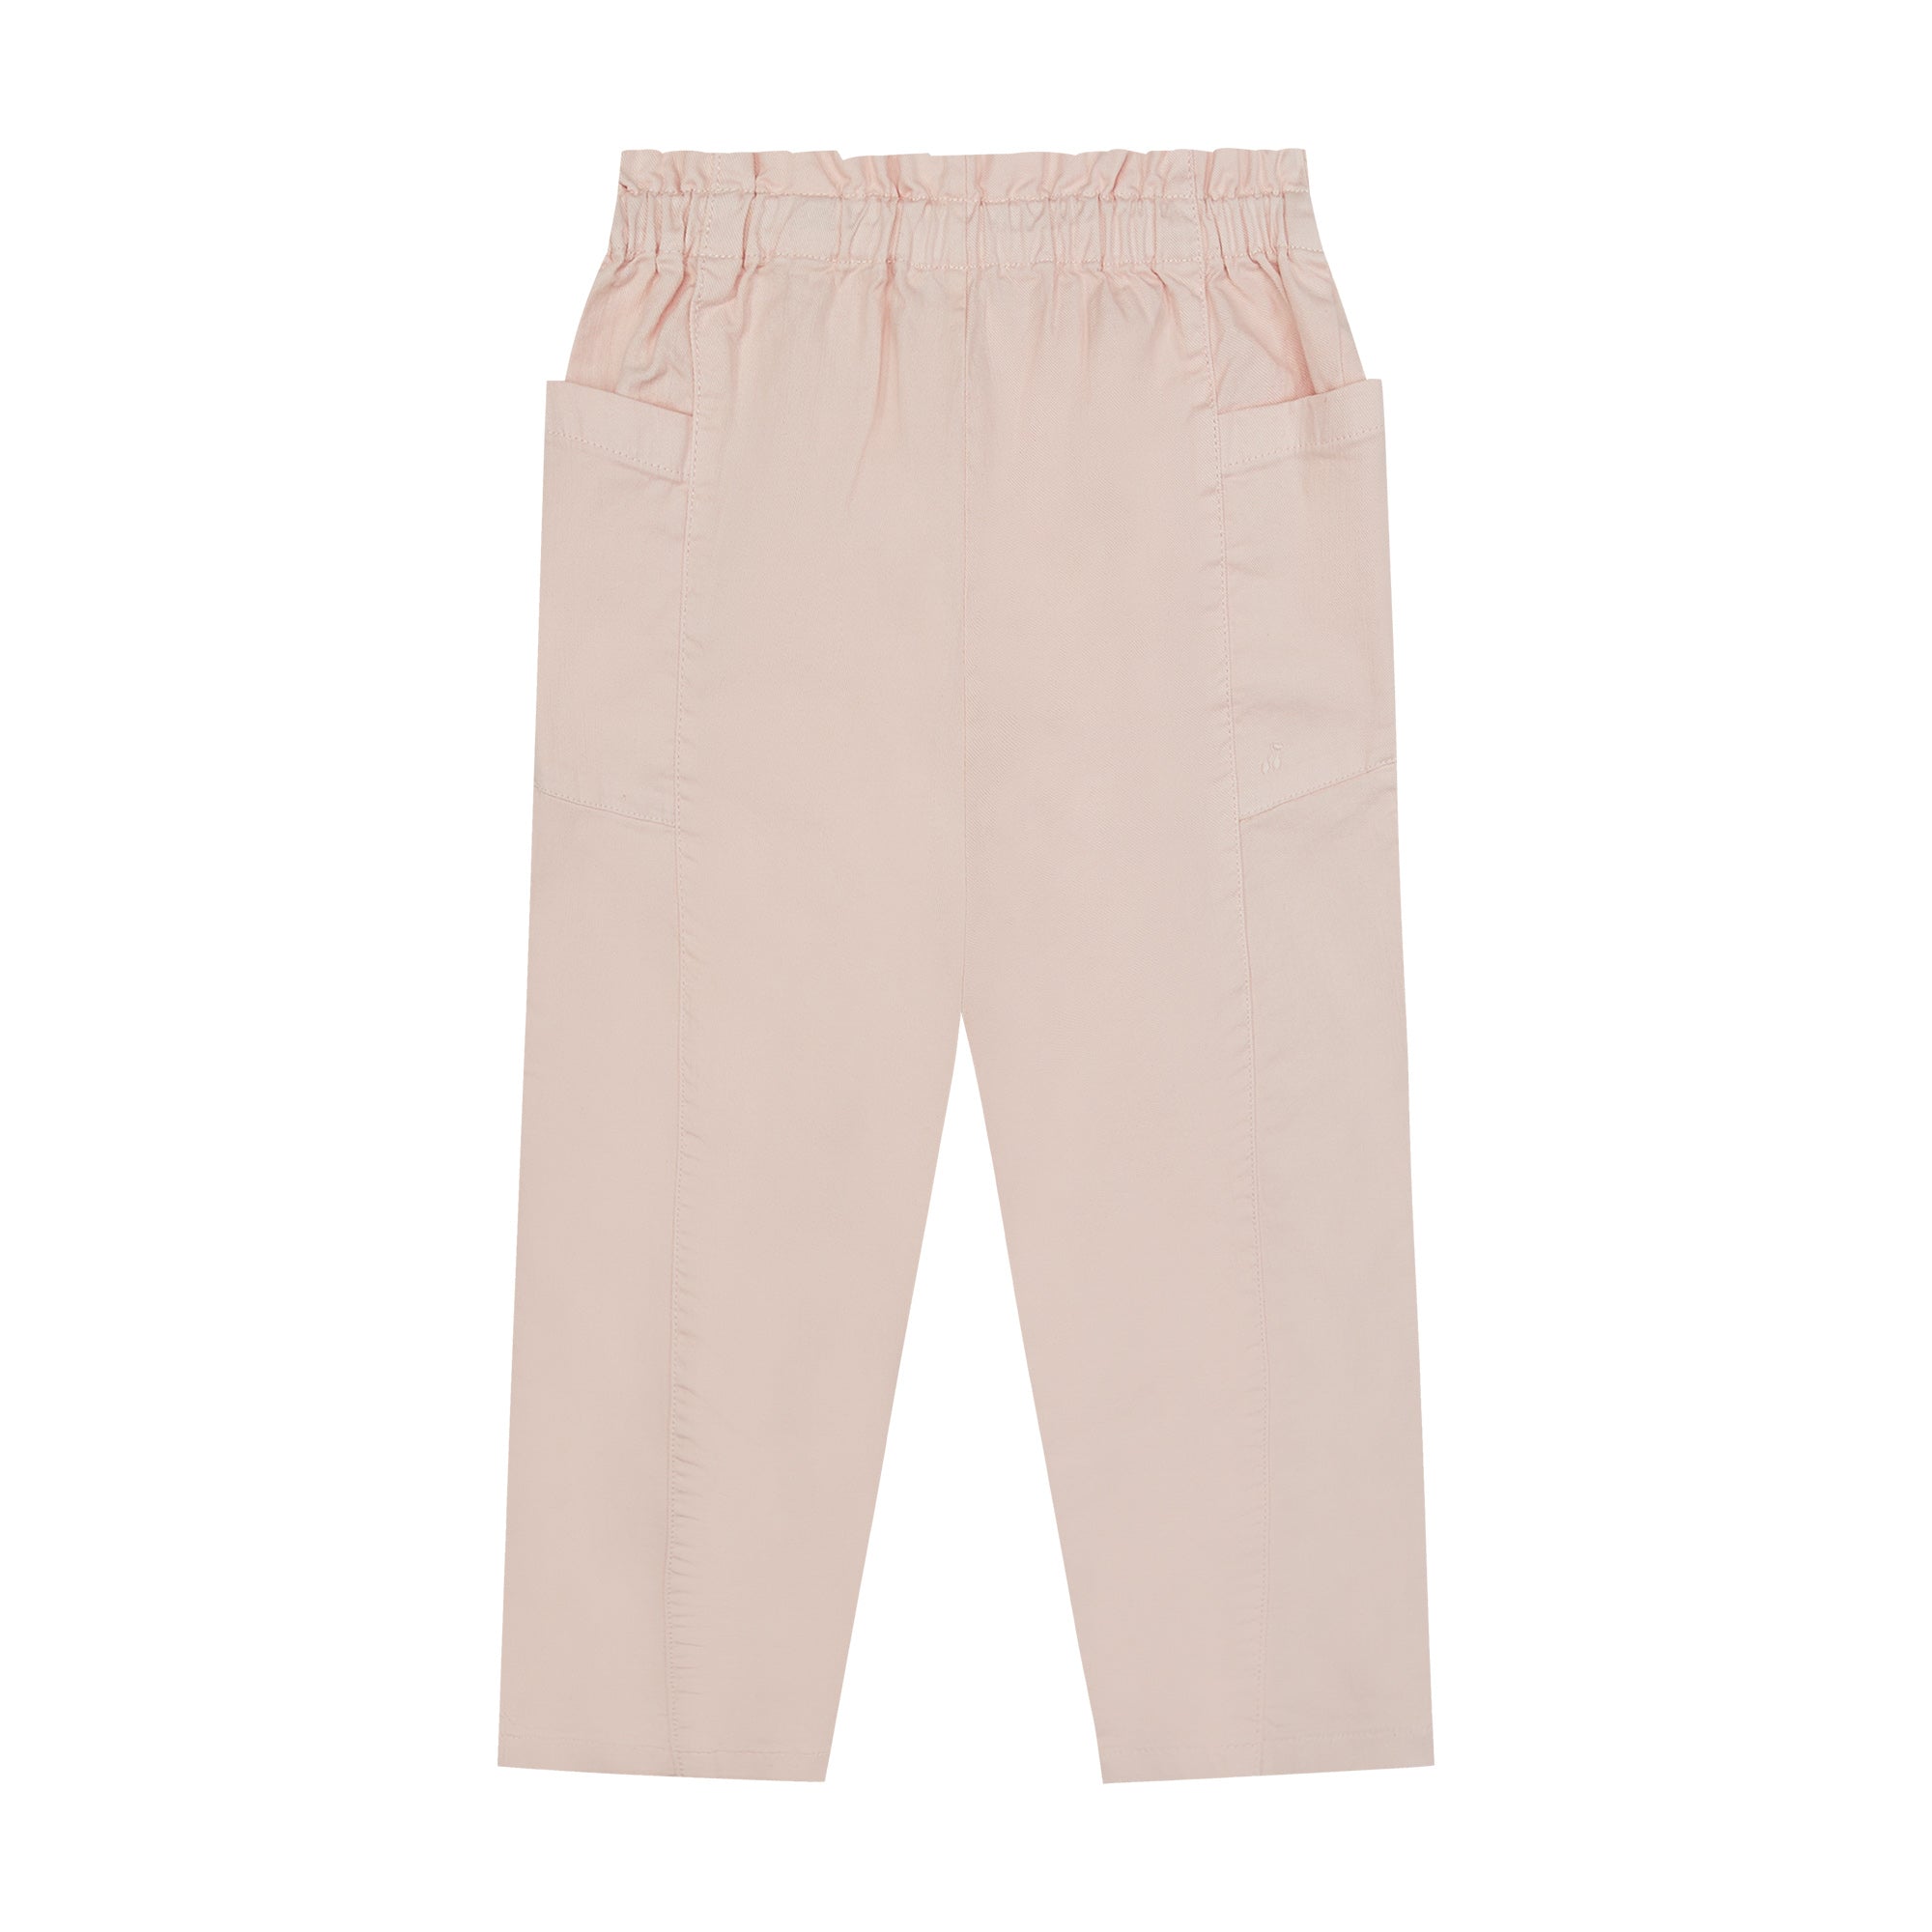 Girls Pink Cotton Trousers